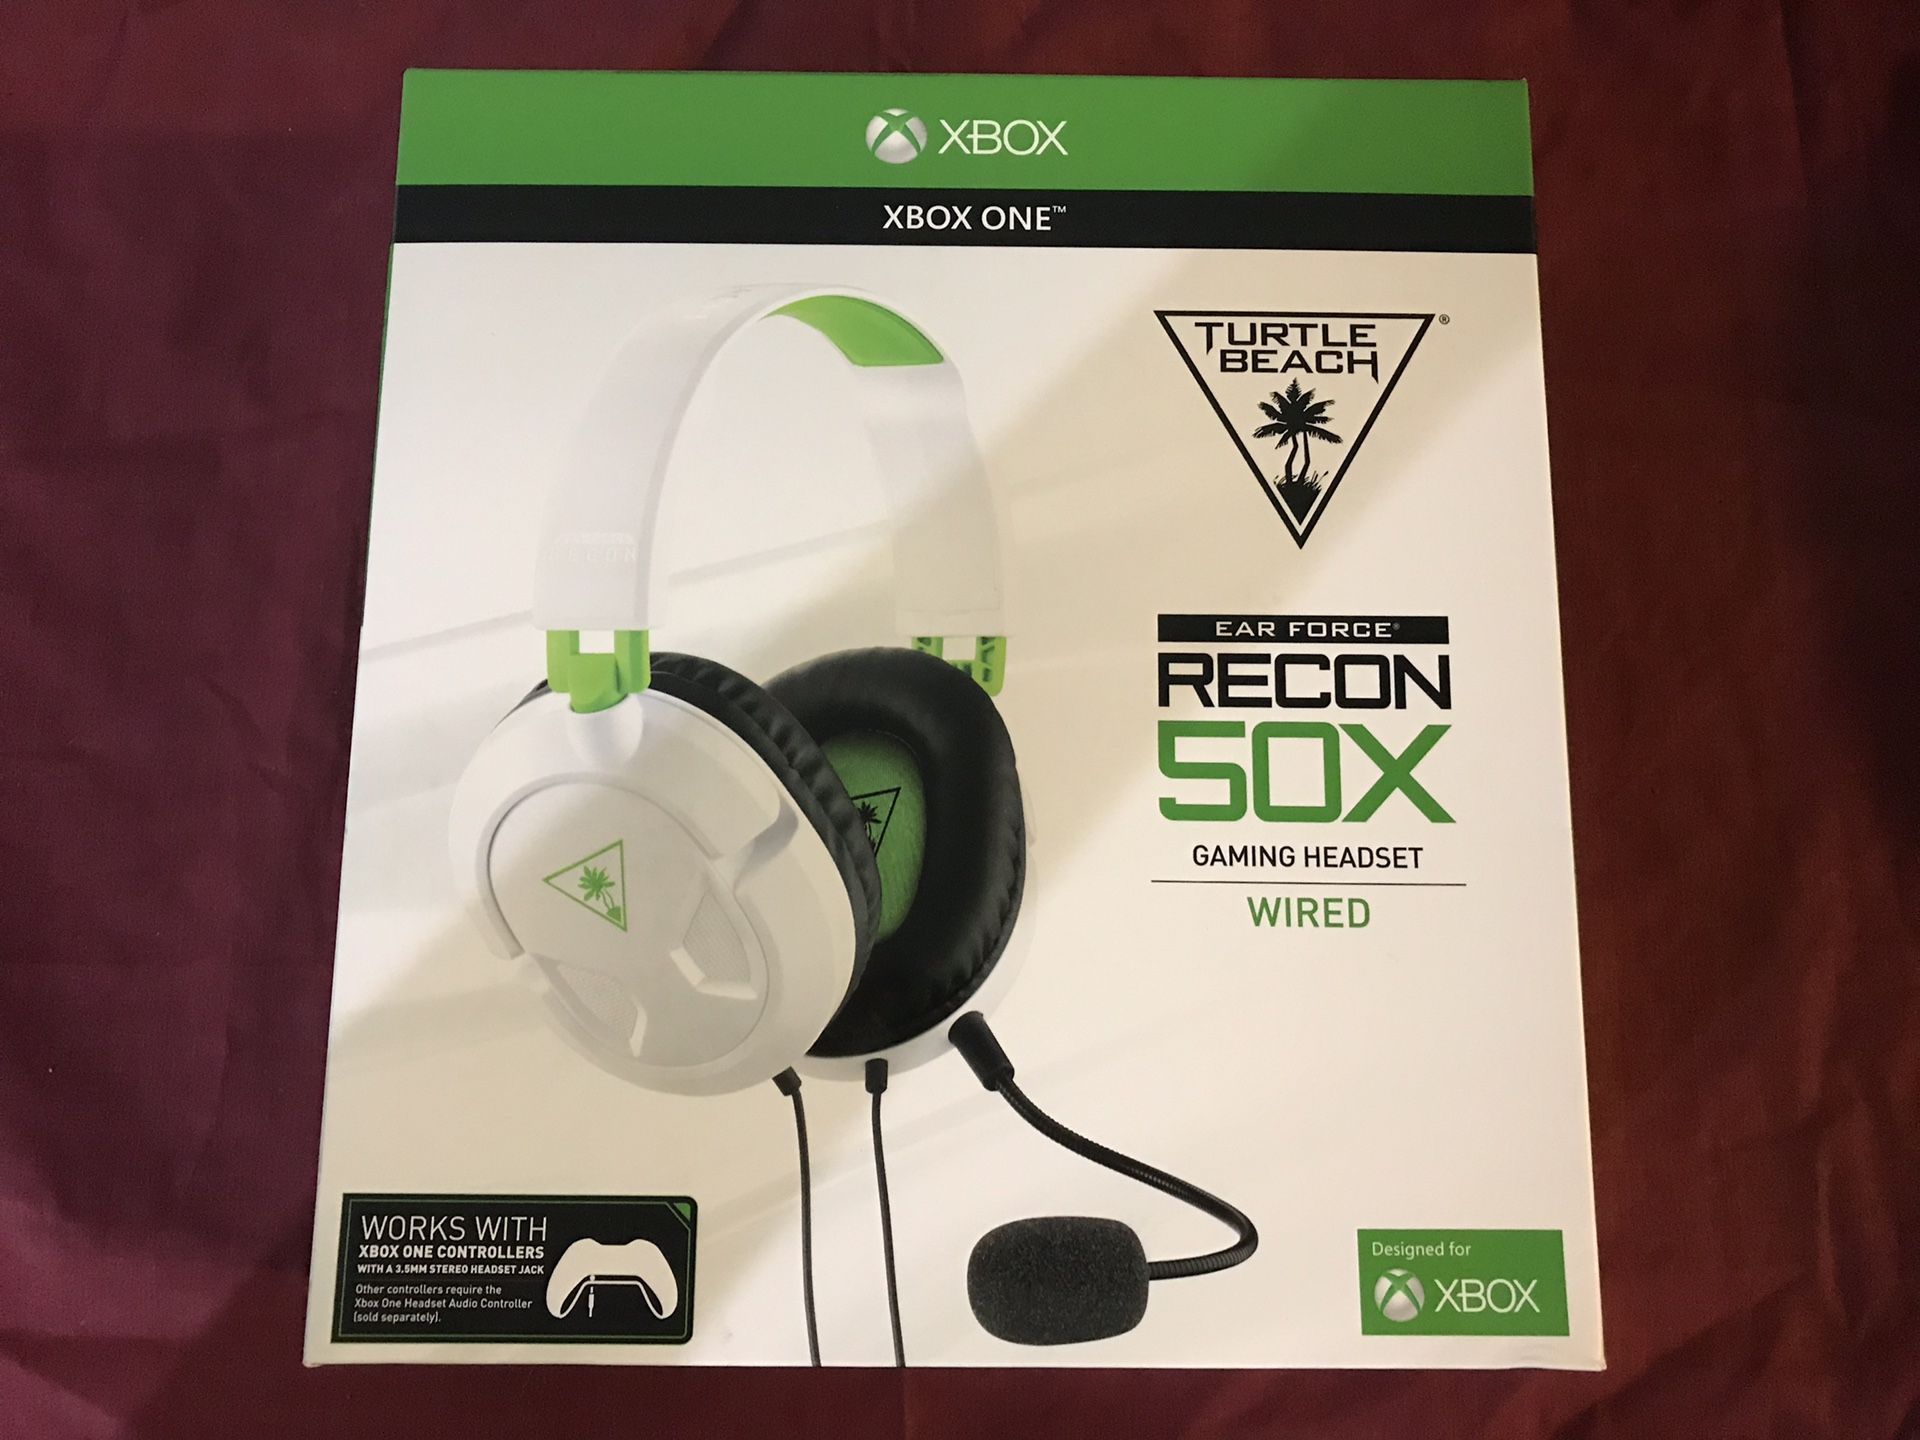 NEW Turtle Beach Ear Force Recon 50X Gaming Headset Headphones - Xbox One White